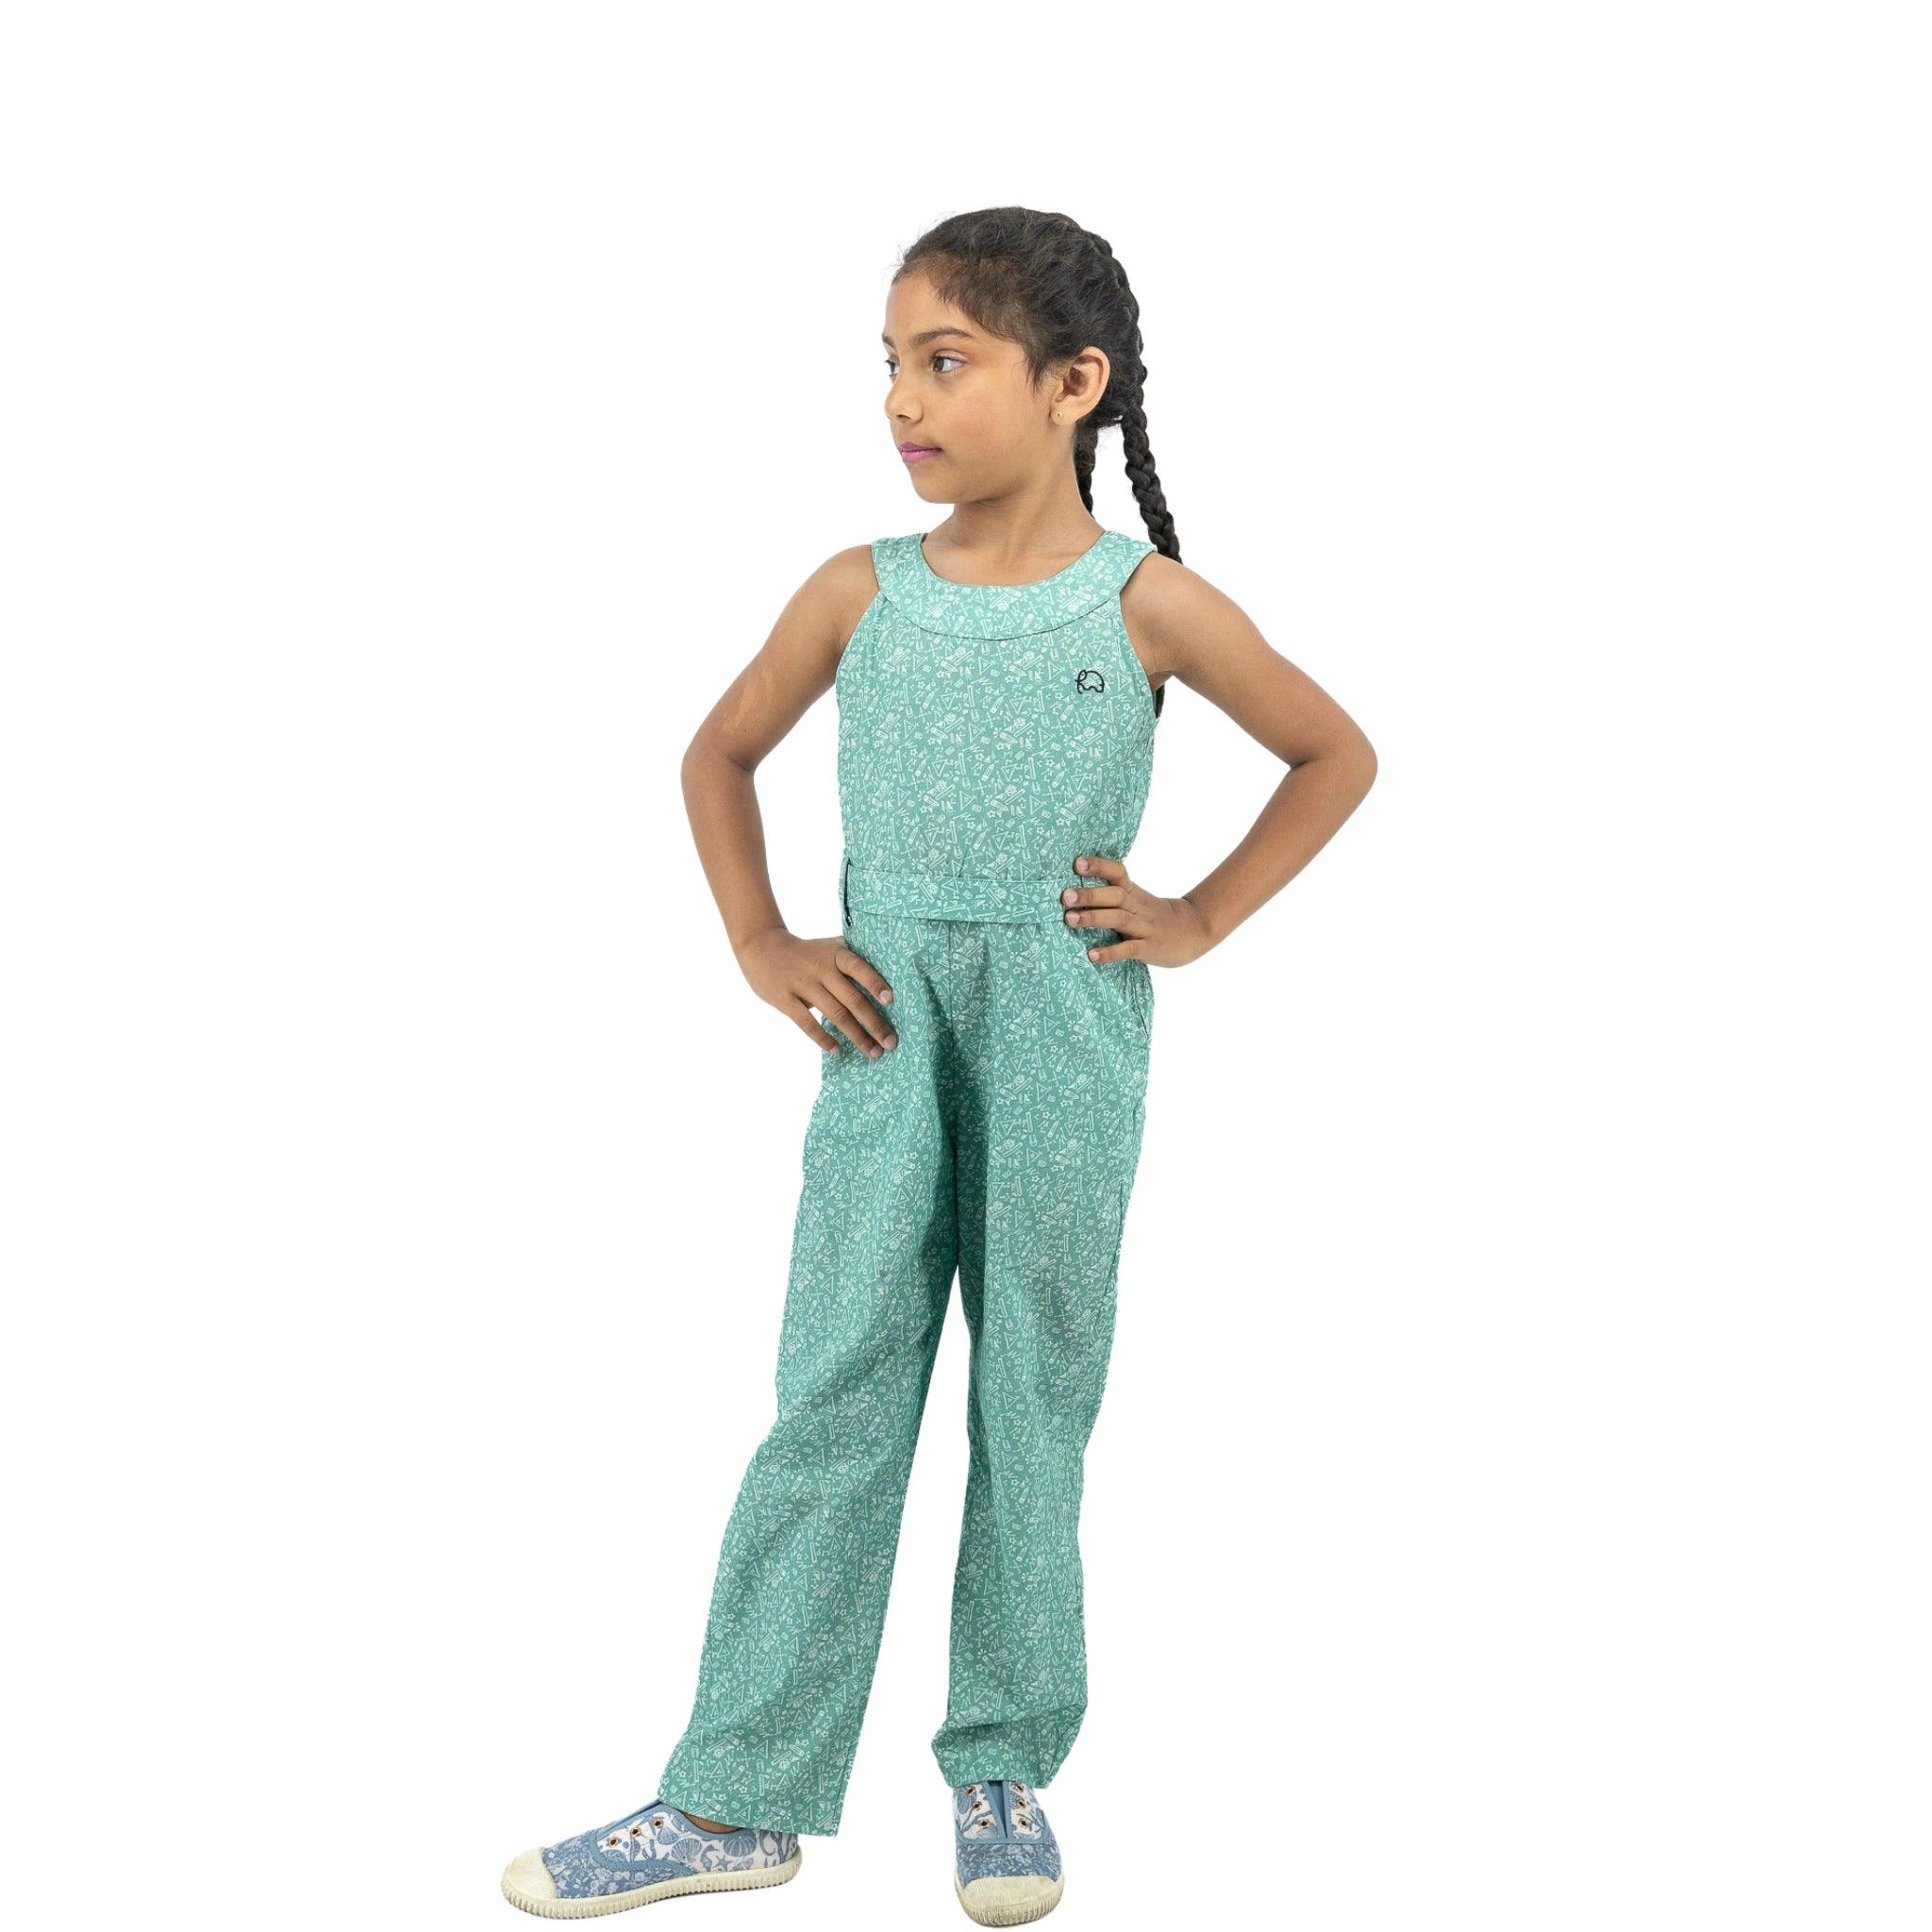 A young girl with braided hair, wearing a Karee smoke green cotton jumpsuit and sneakers, stands with her hands on her hips and looks to the side on a white background.